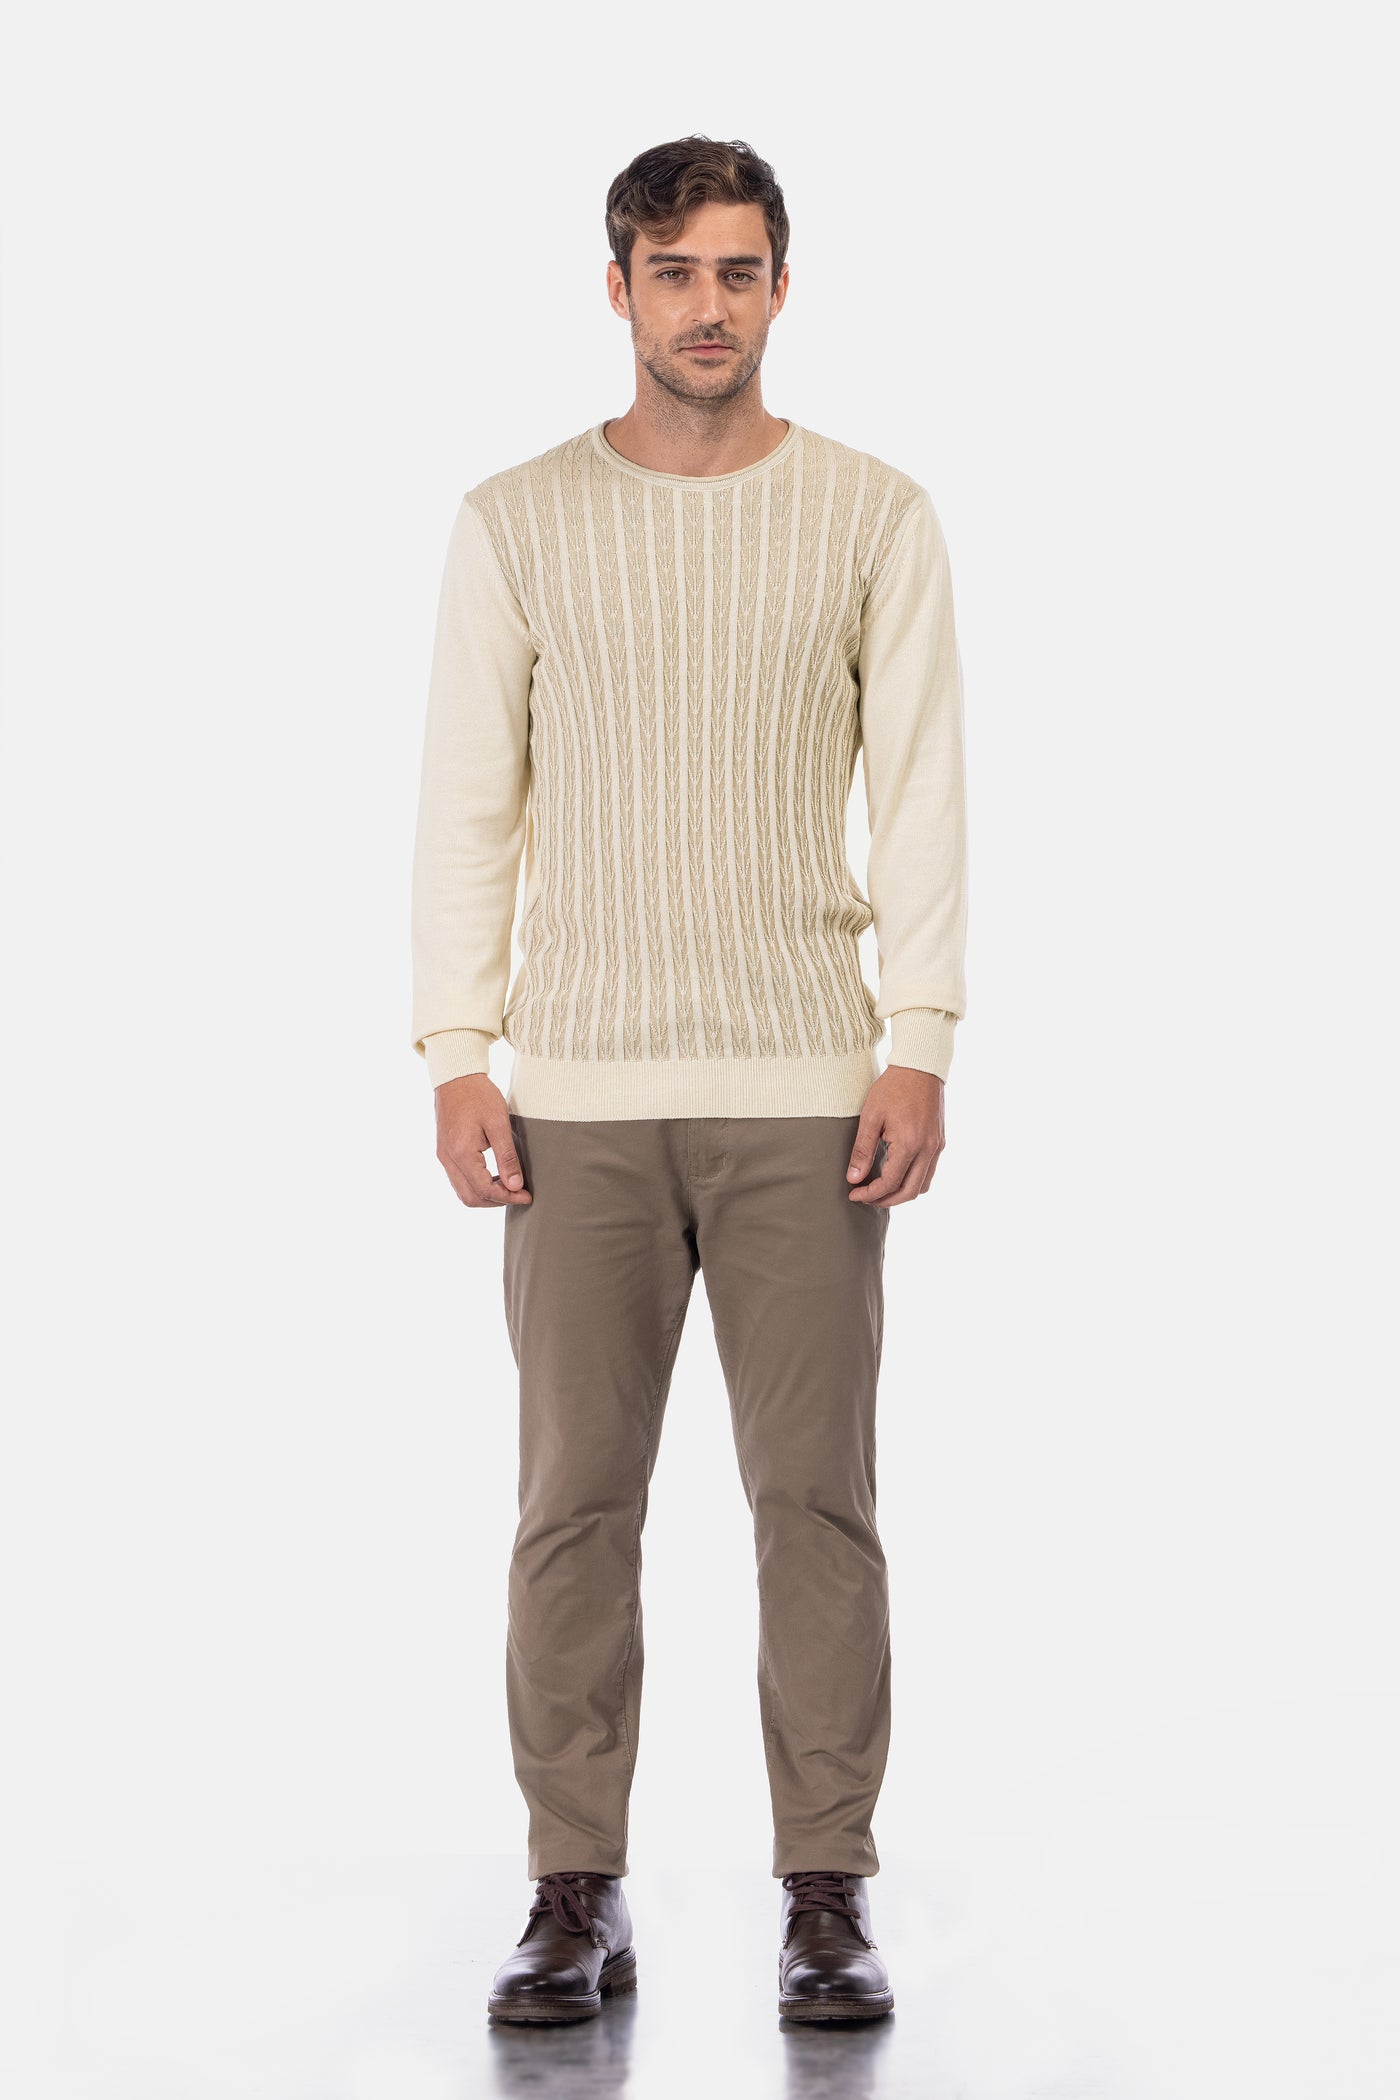 Jacquard Round Neck Beige Knitted Pullover